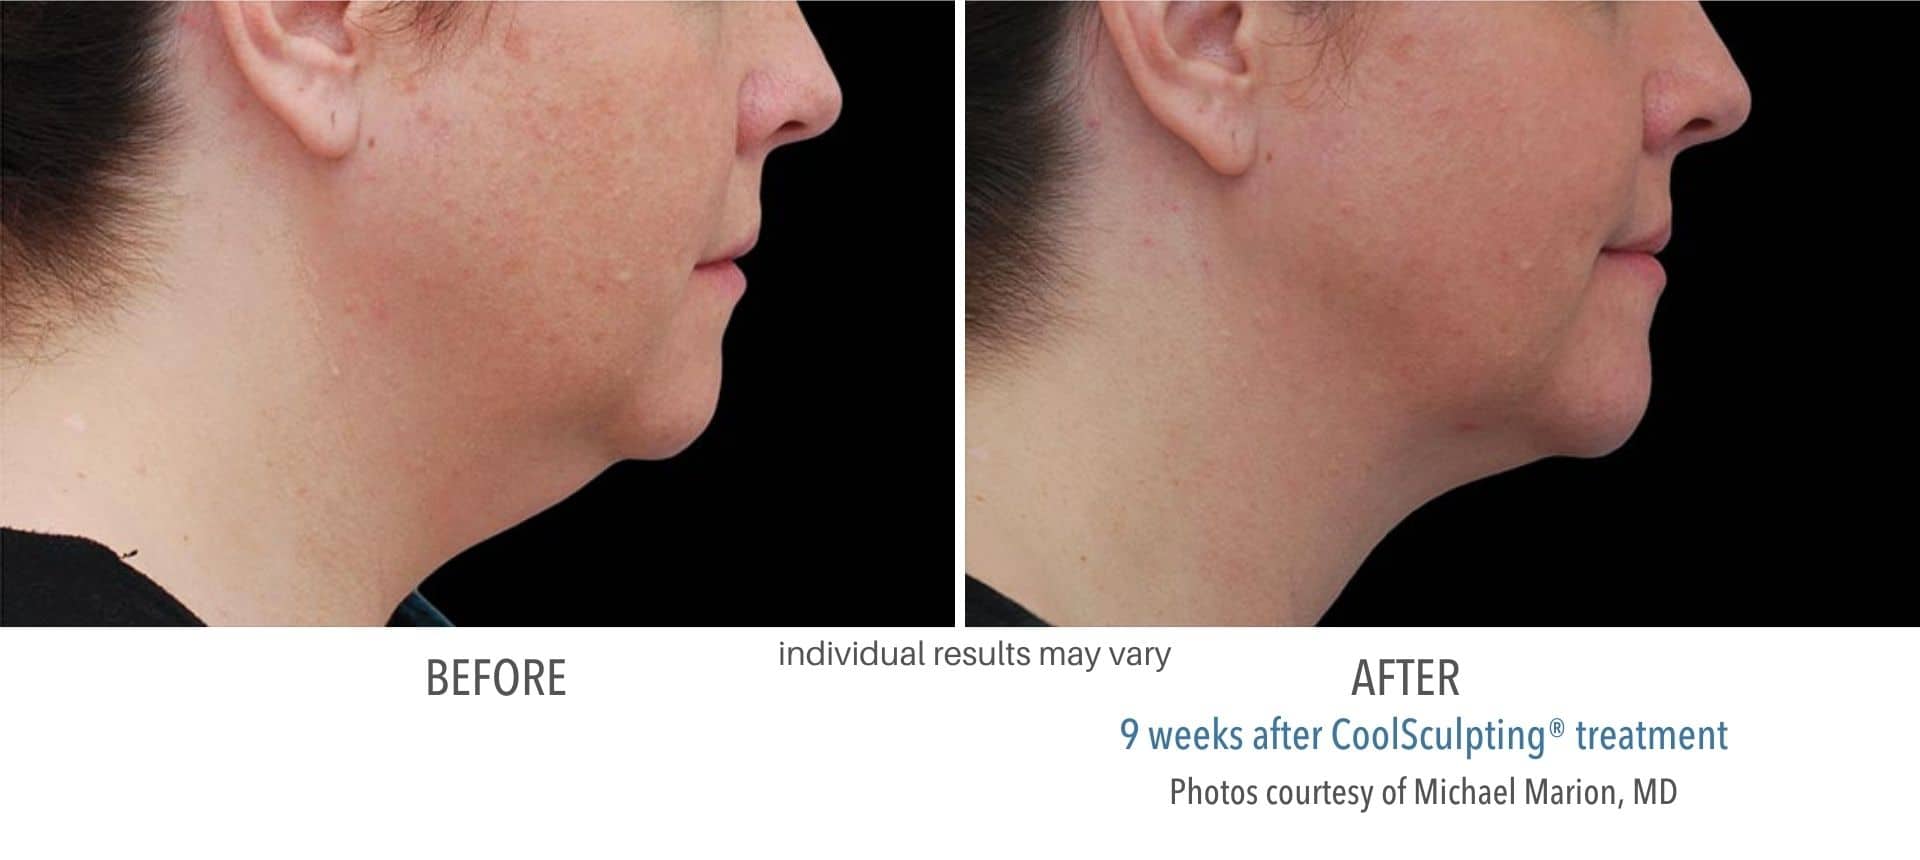 CoolSculpting double chin treatment before and after